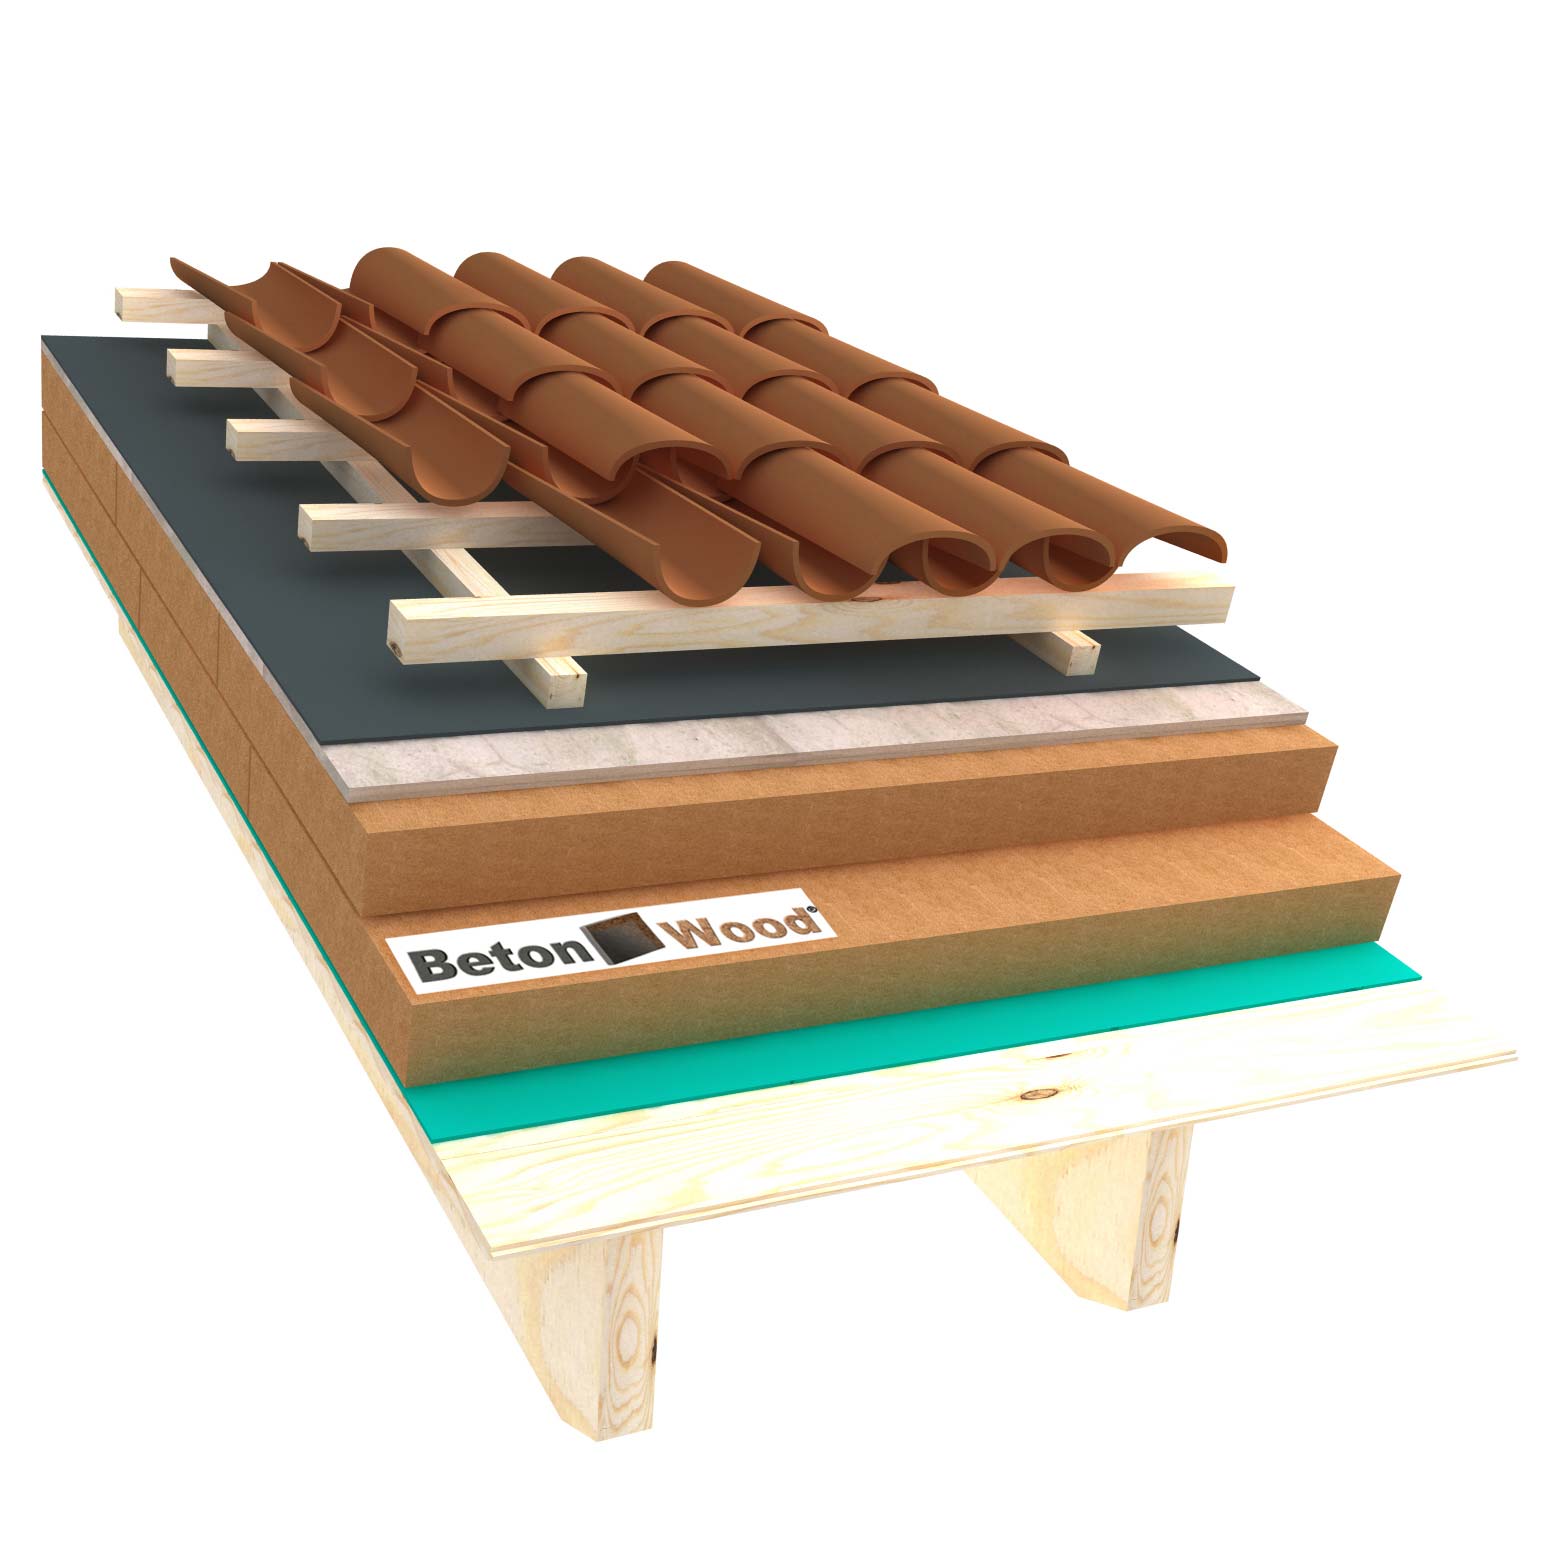 Ventilated roof with wood fiber Therm SD and cement bonded particle boards on matchboarding